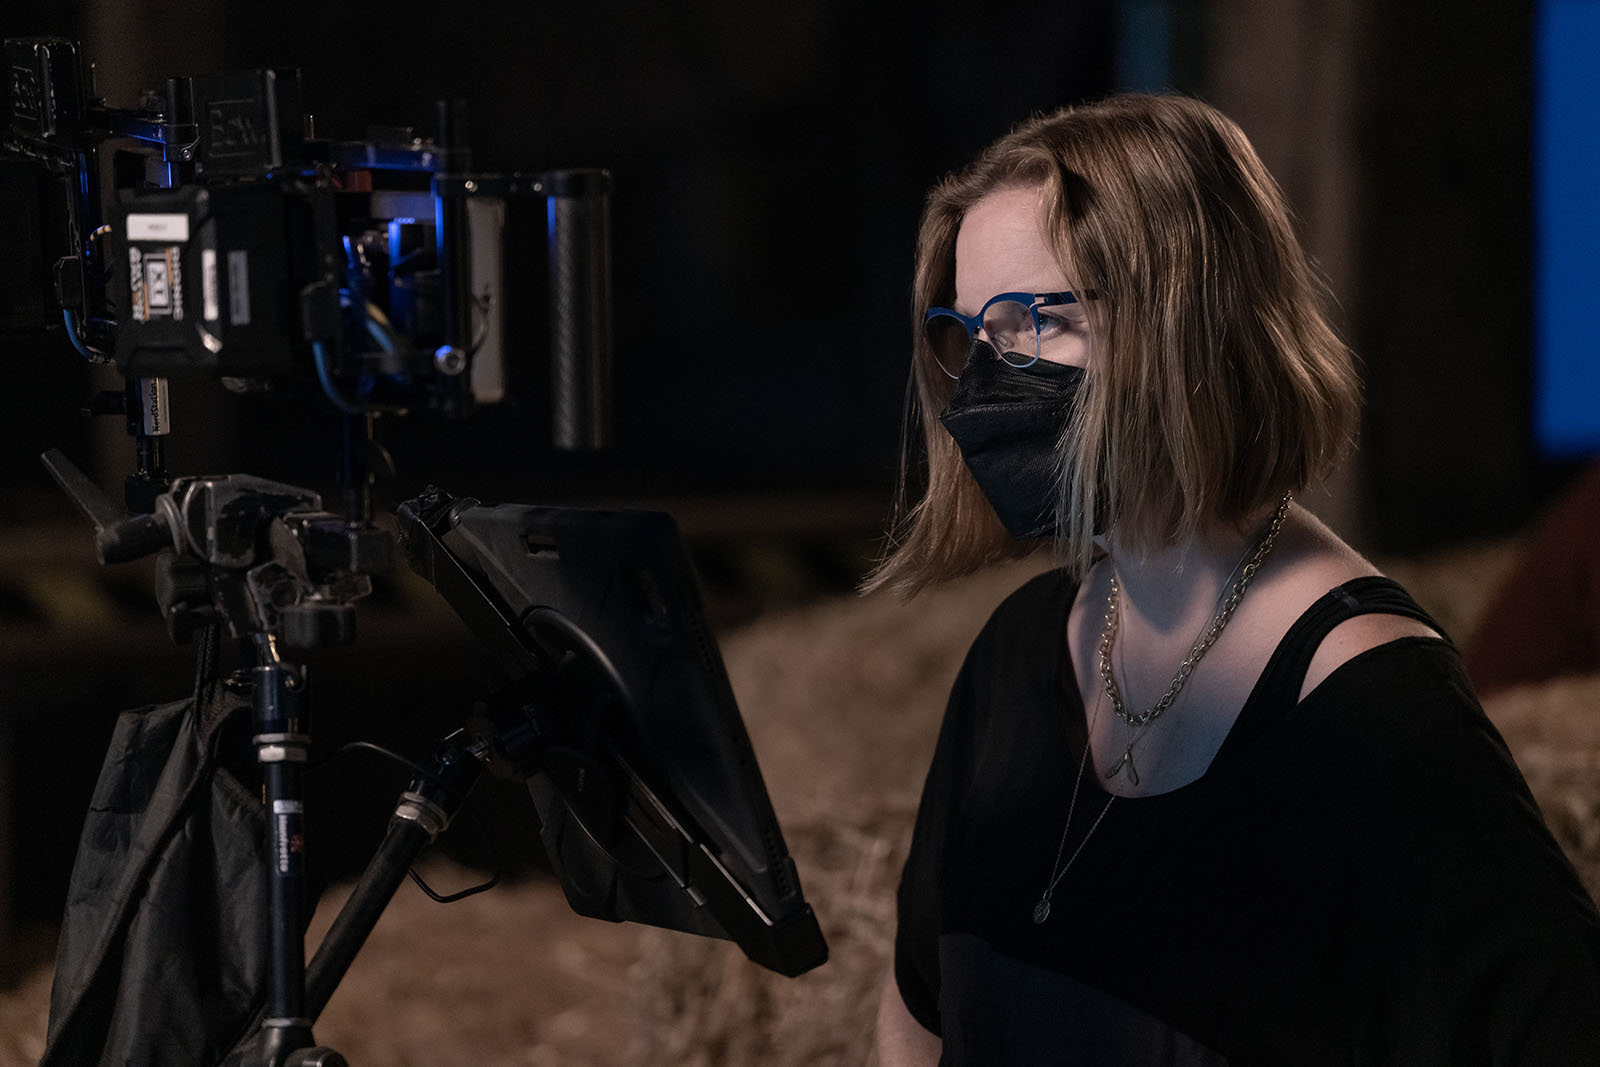 Director Sarah Polley on the set of Women Talking. Images © United Artists